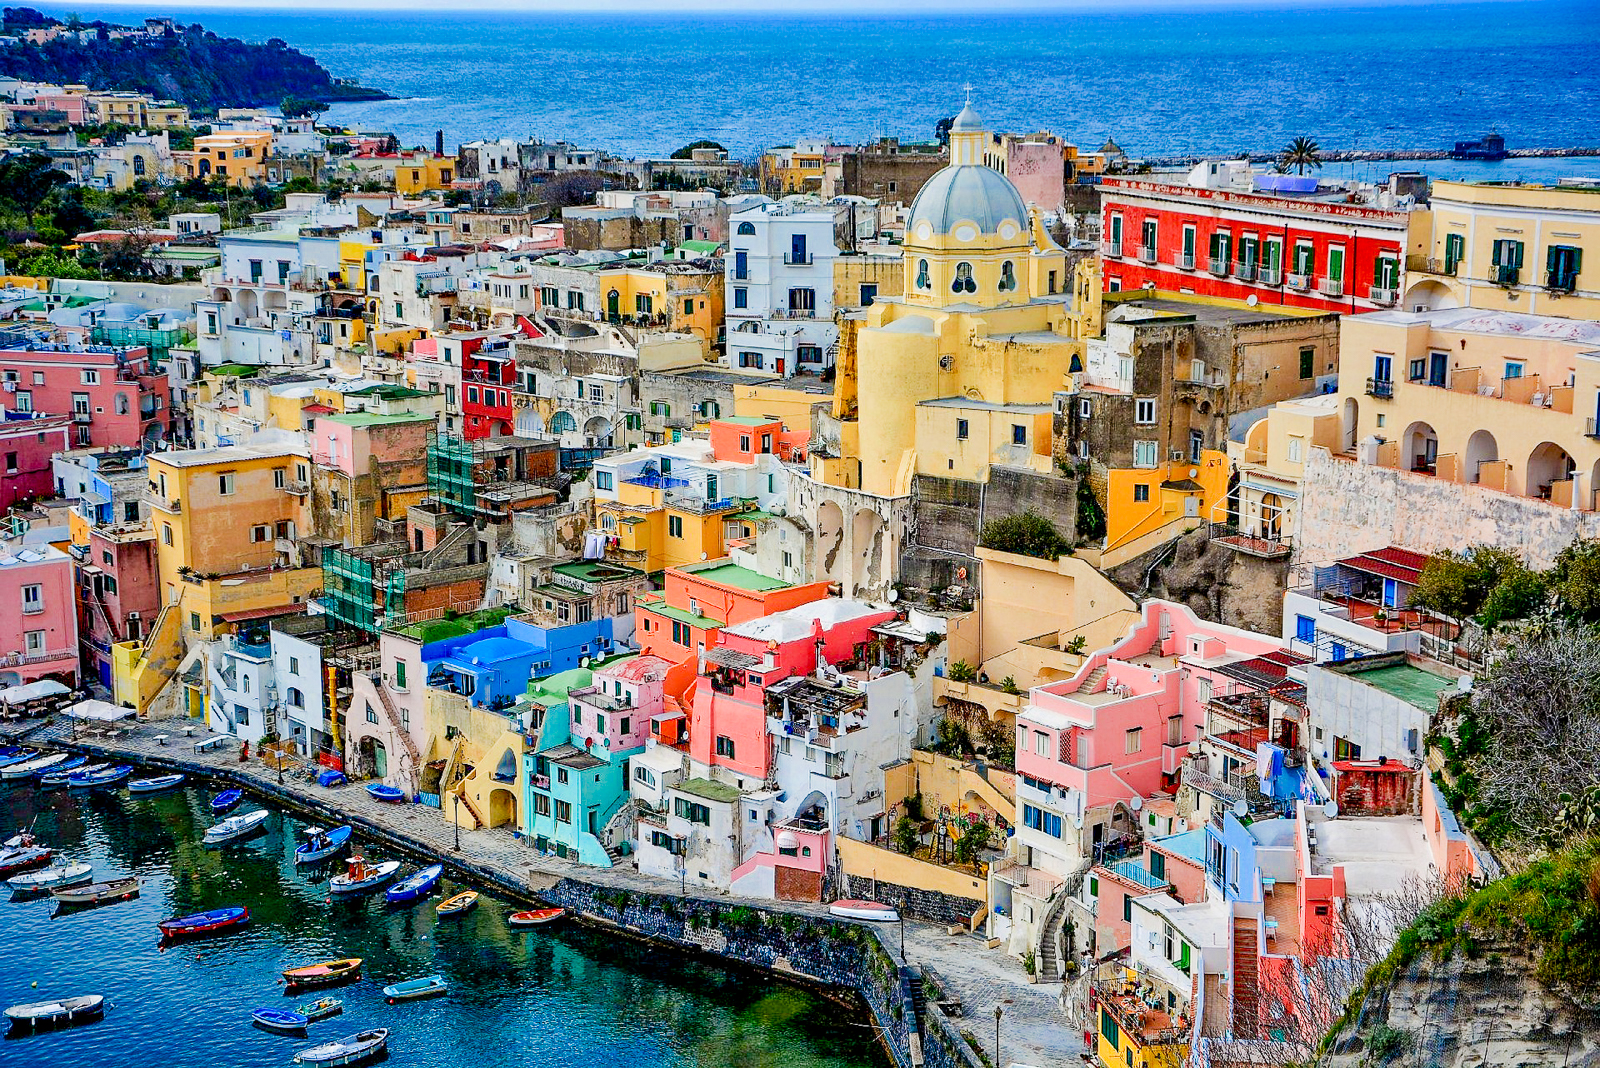 An aerial view of the colourful houses on Procida